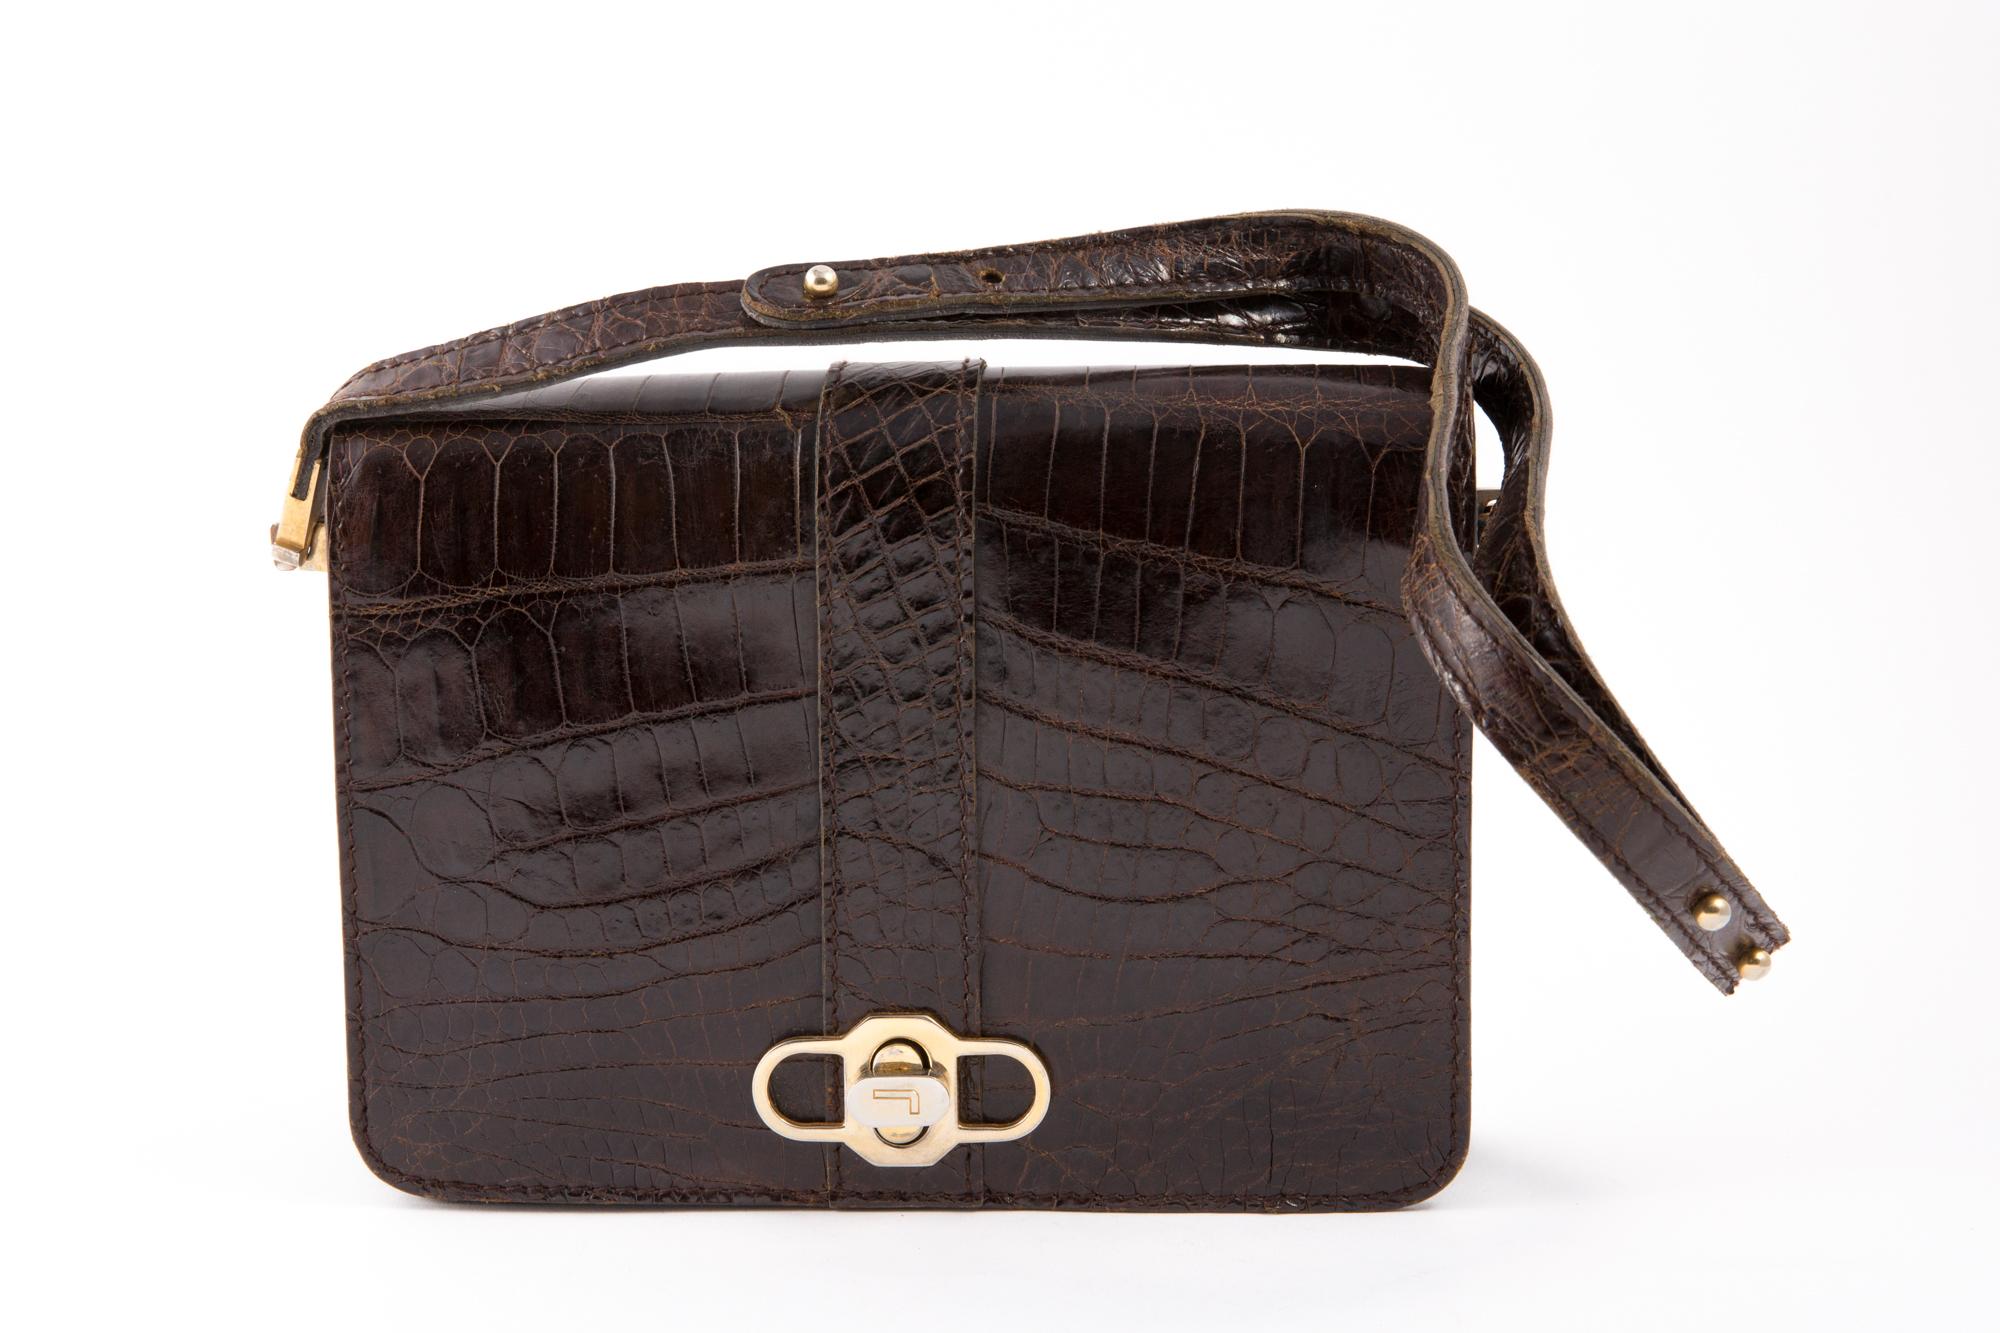 1970s brown leather handbag featuring an adjustable hand strap,  a front gold tone claps opening, inside compartments.
Length at Bottom 8.6in. (22 cm)
Height: 6.2in. (16 cm)
Width:2.7in (7cm)
In good vintage condition.  Made in France.
Please note